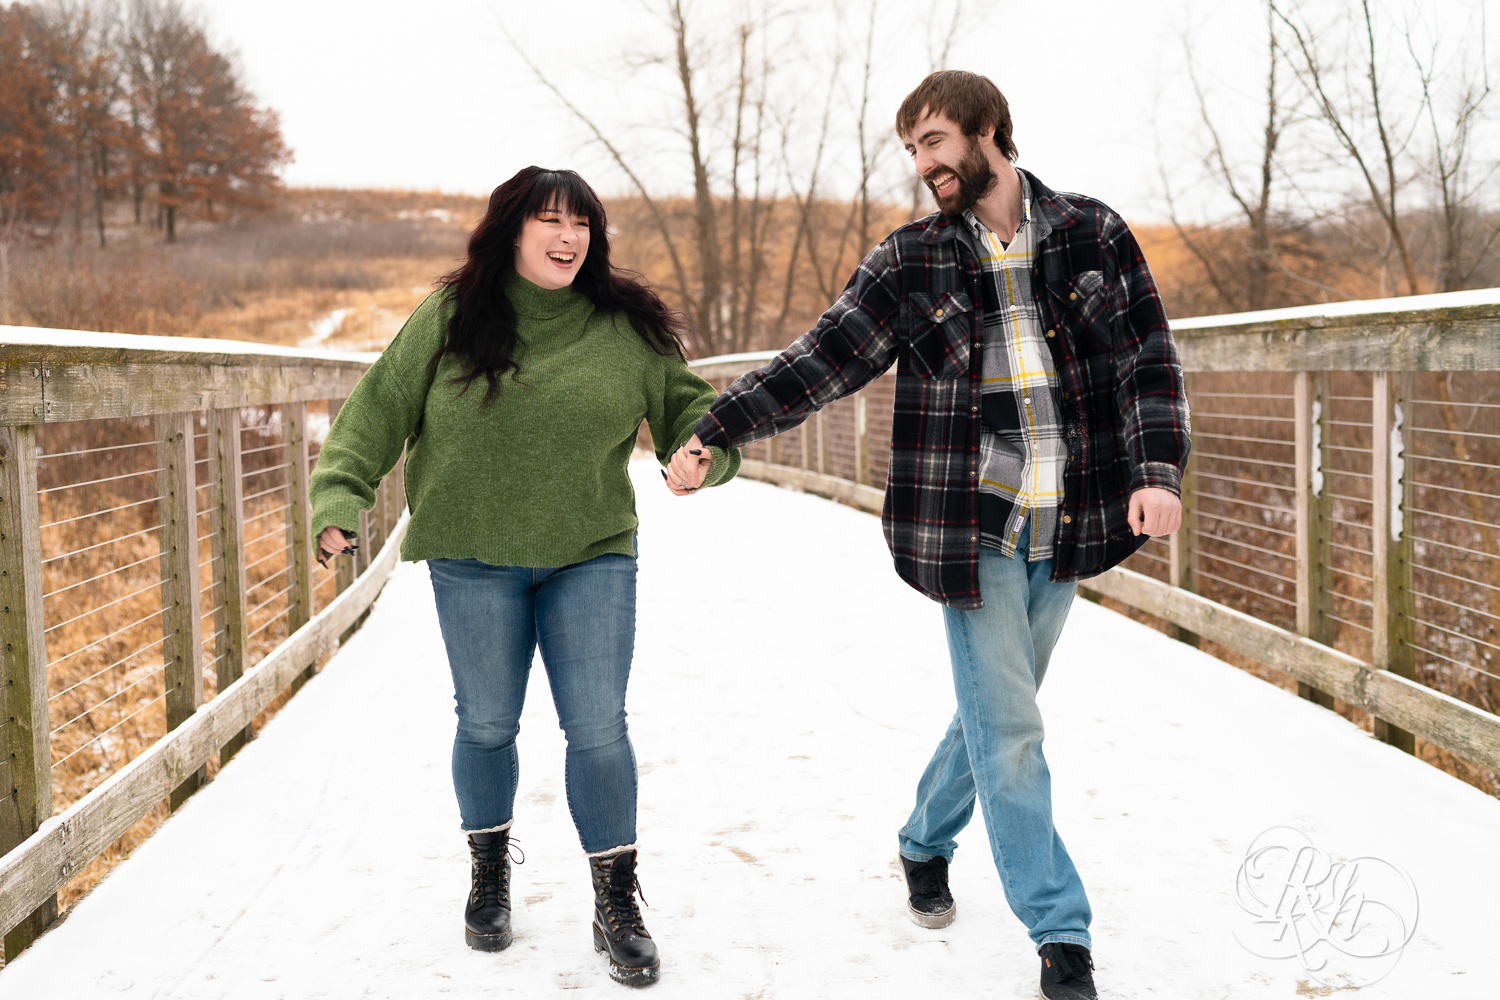 Man in flannel and woman in green sweater and jeans laugh and walk across snowy bridge at Lebanon Hills in Eagan, Minnesota.